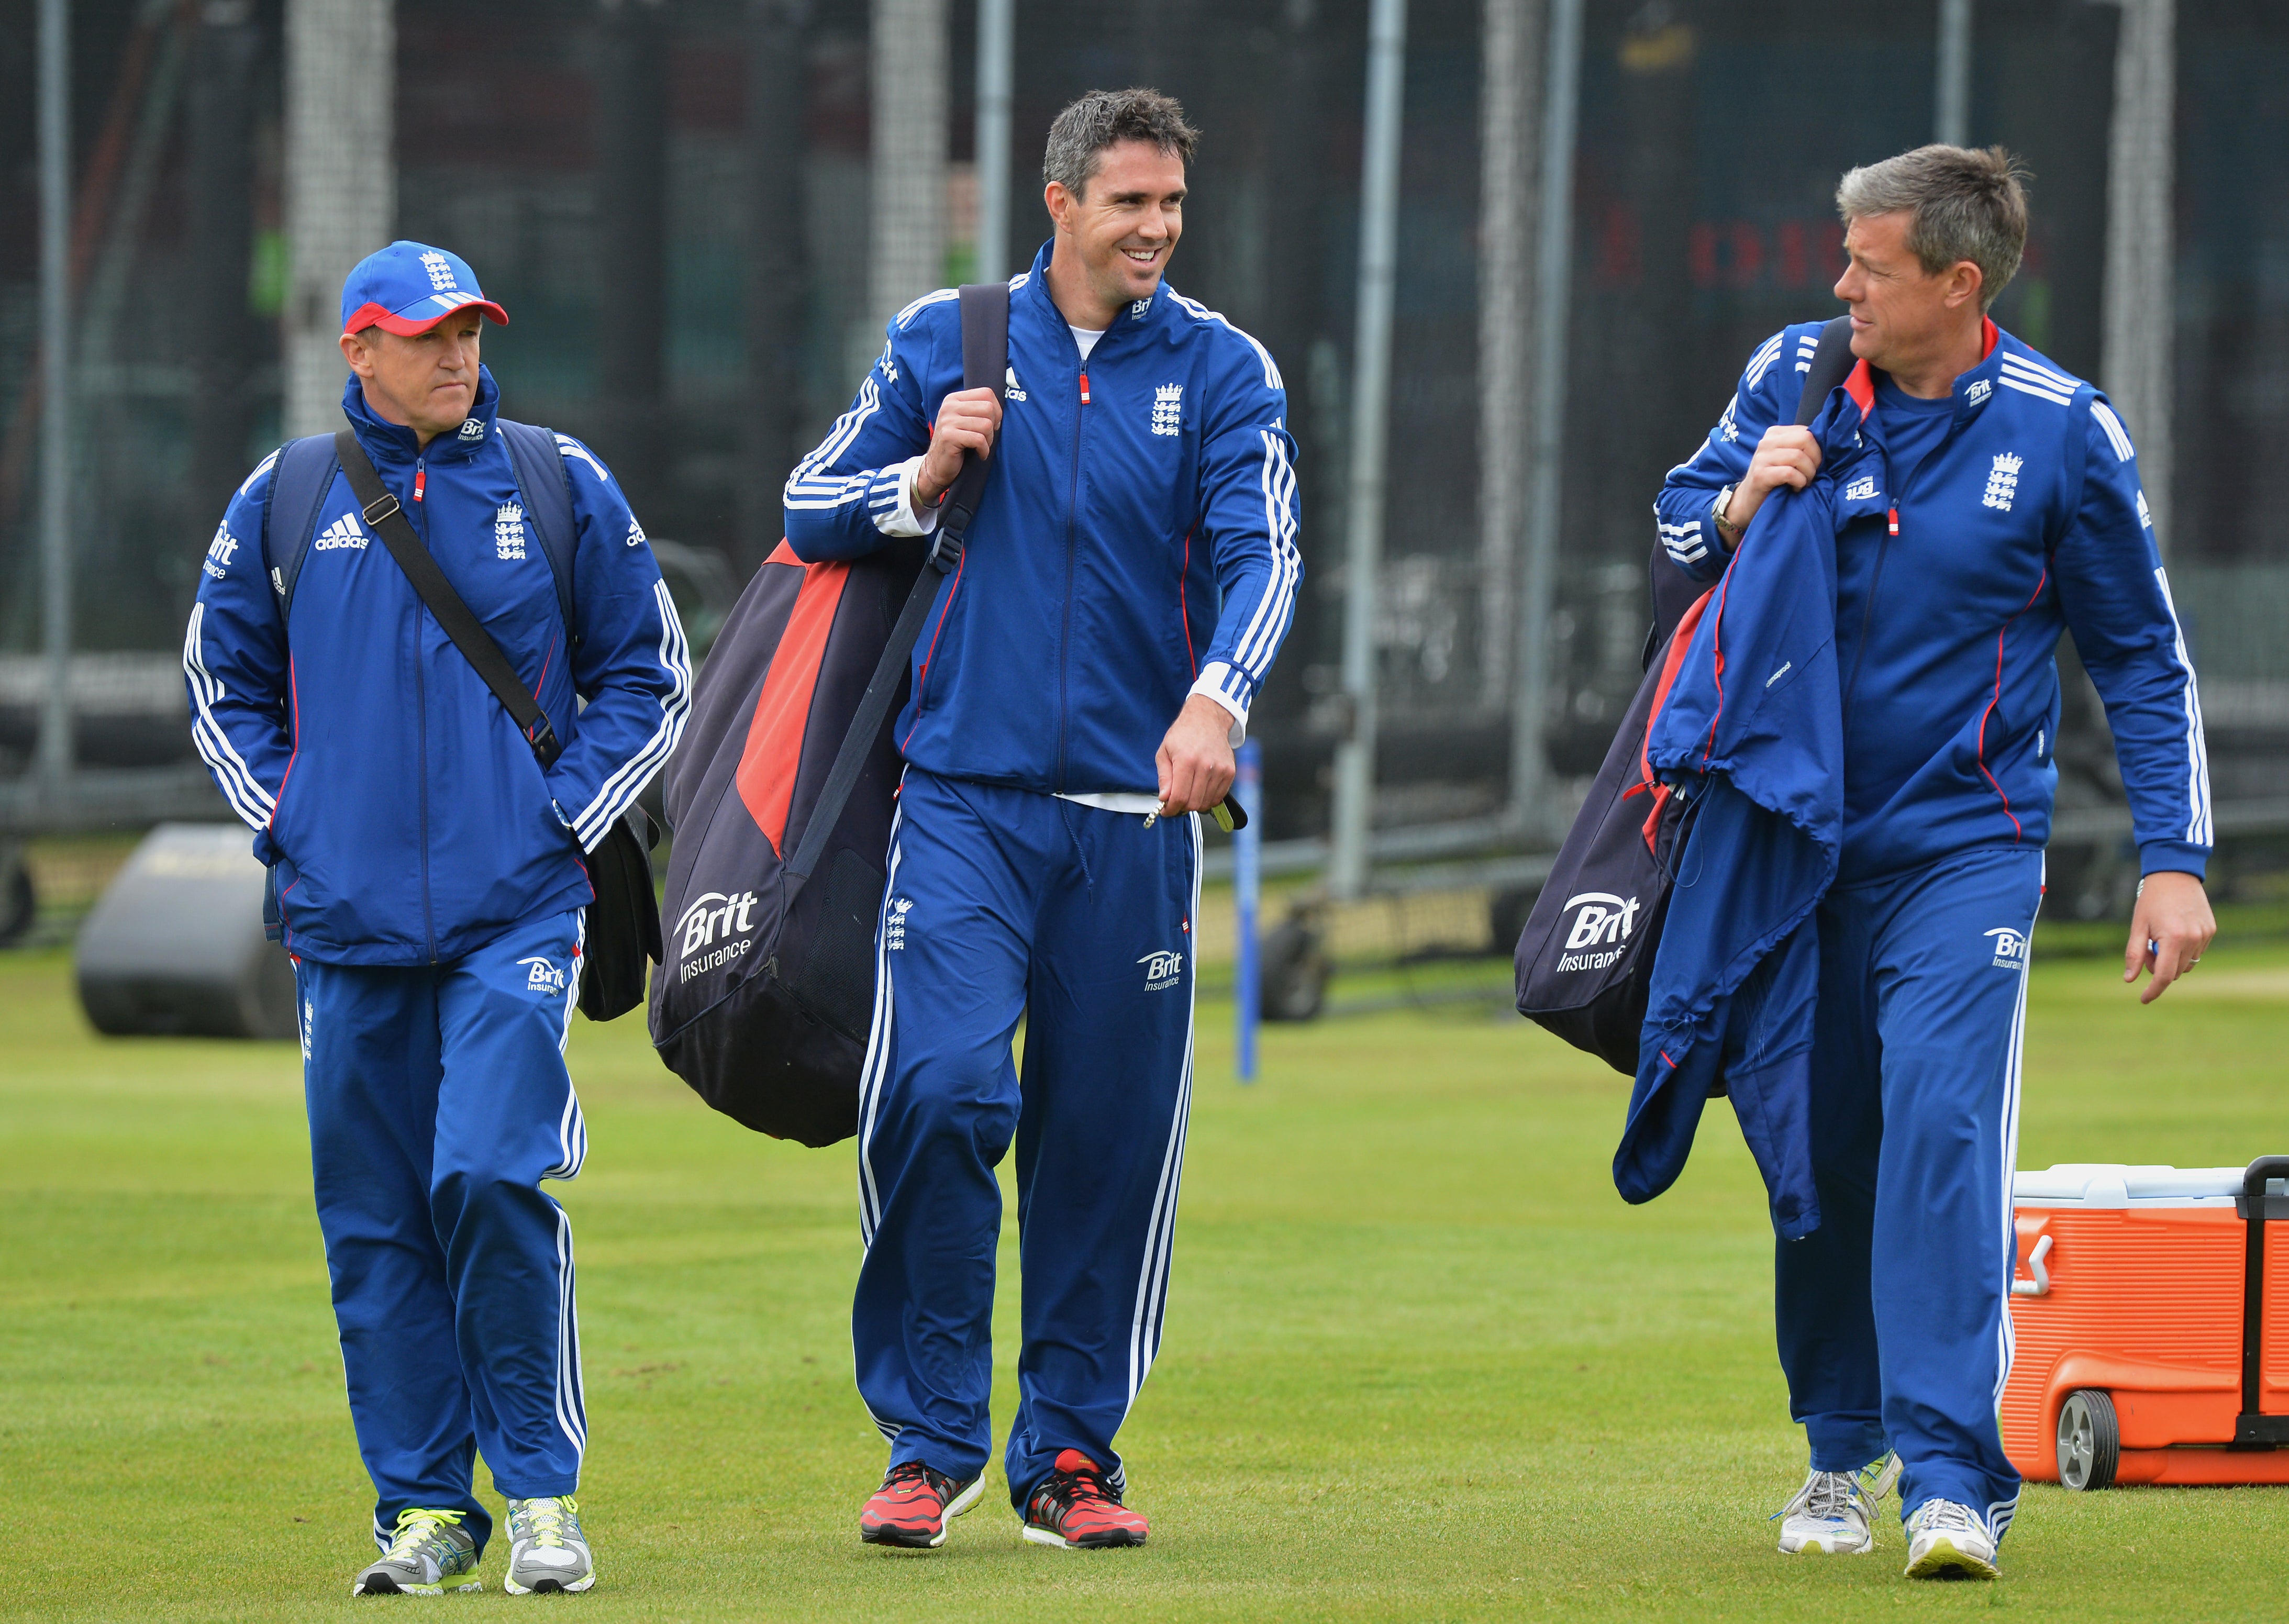 Andy Flower (left) and Ashley Giles (right) split coaching duties previously (Anthony Devlin/PA)